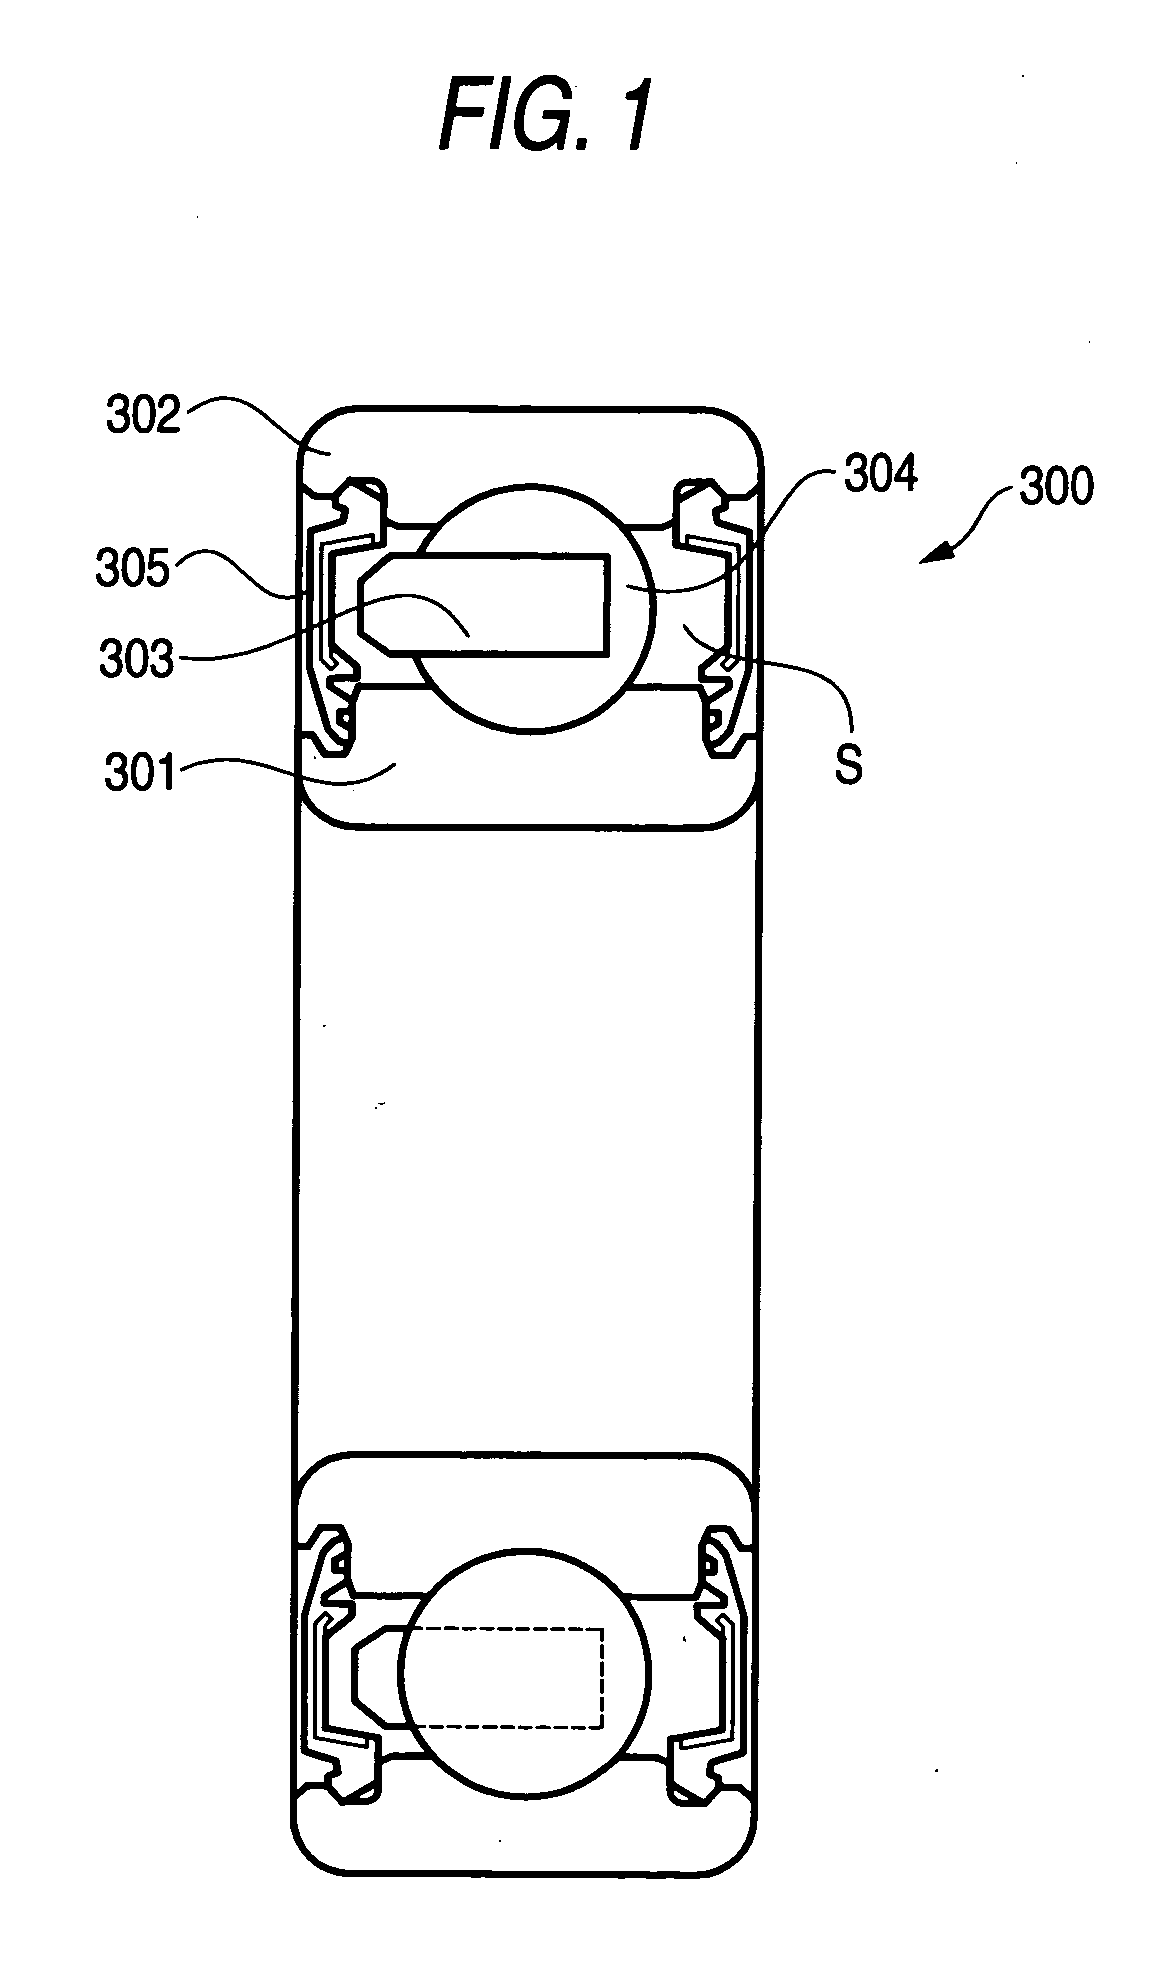 Rolling bearing, rolling bearing for fuel cell, compressor for fuel cell system and fuel cell system